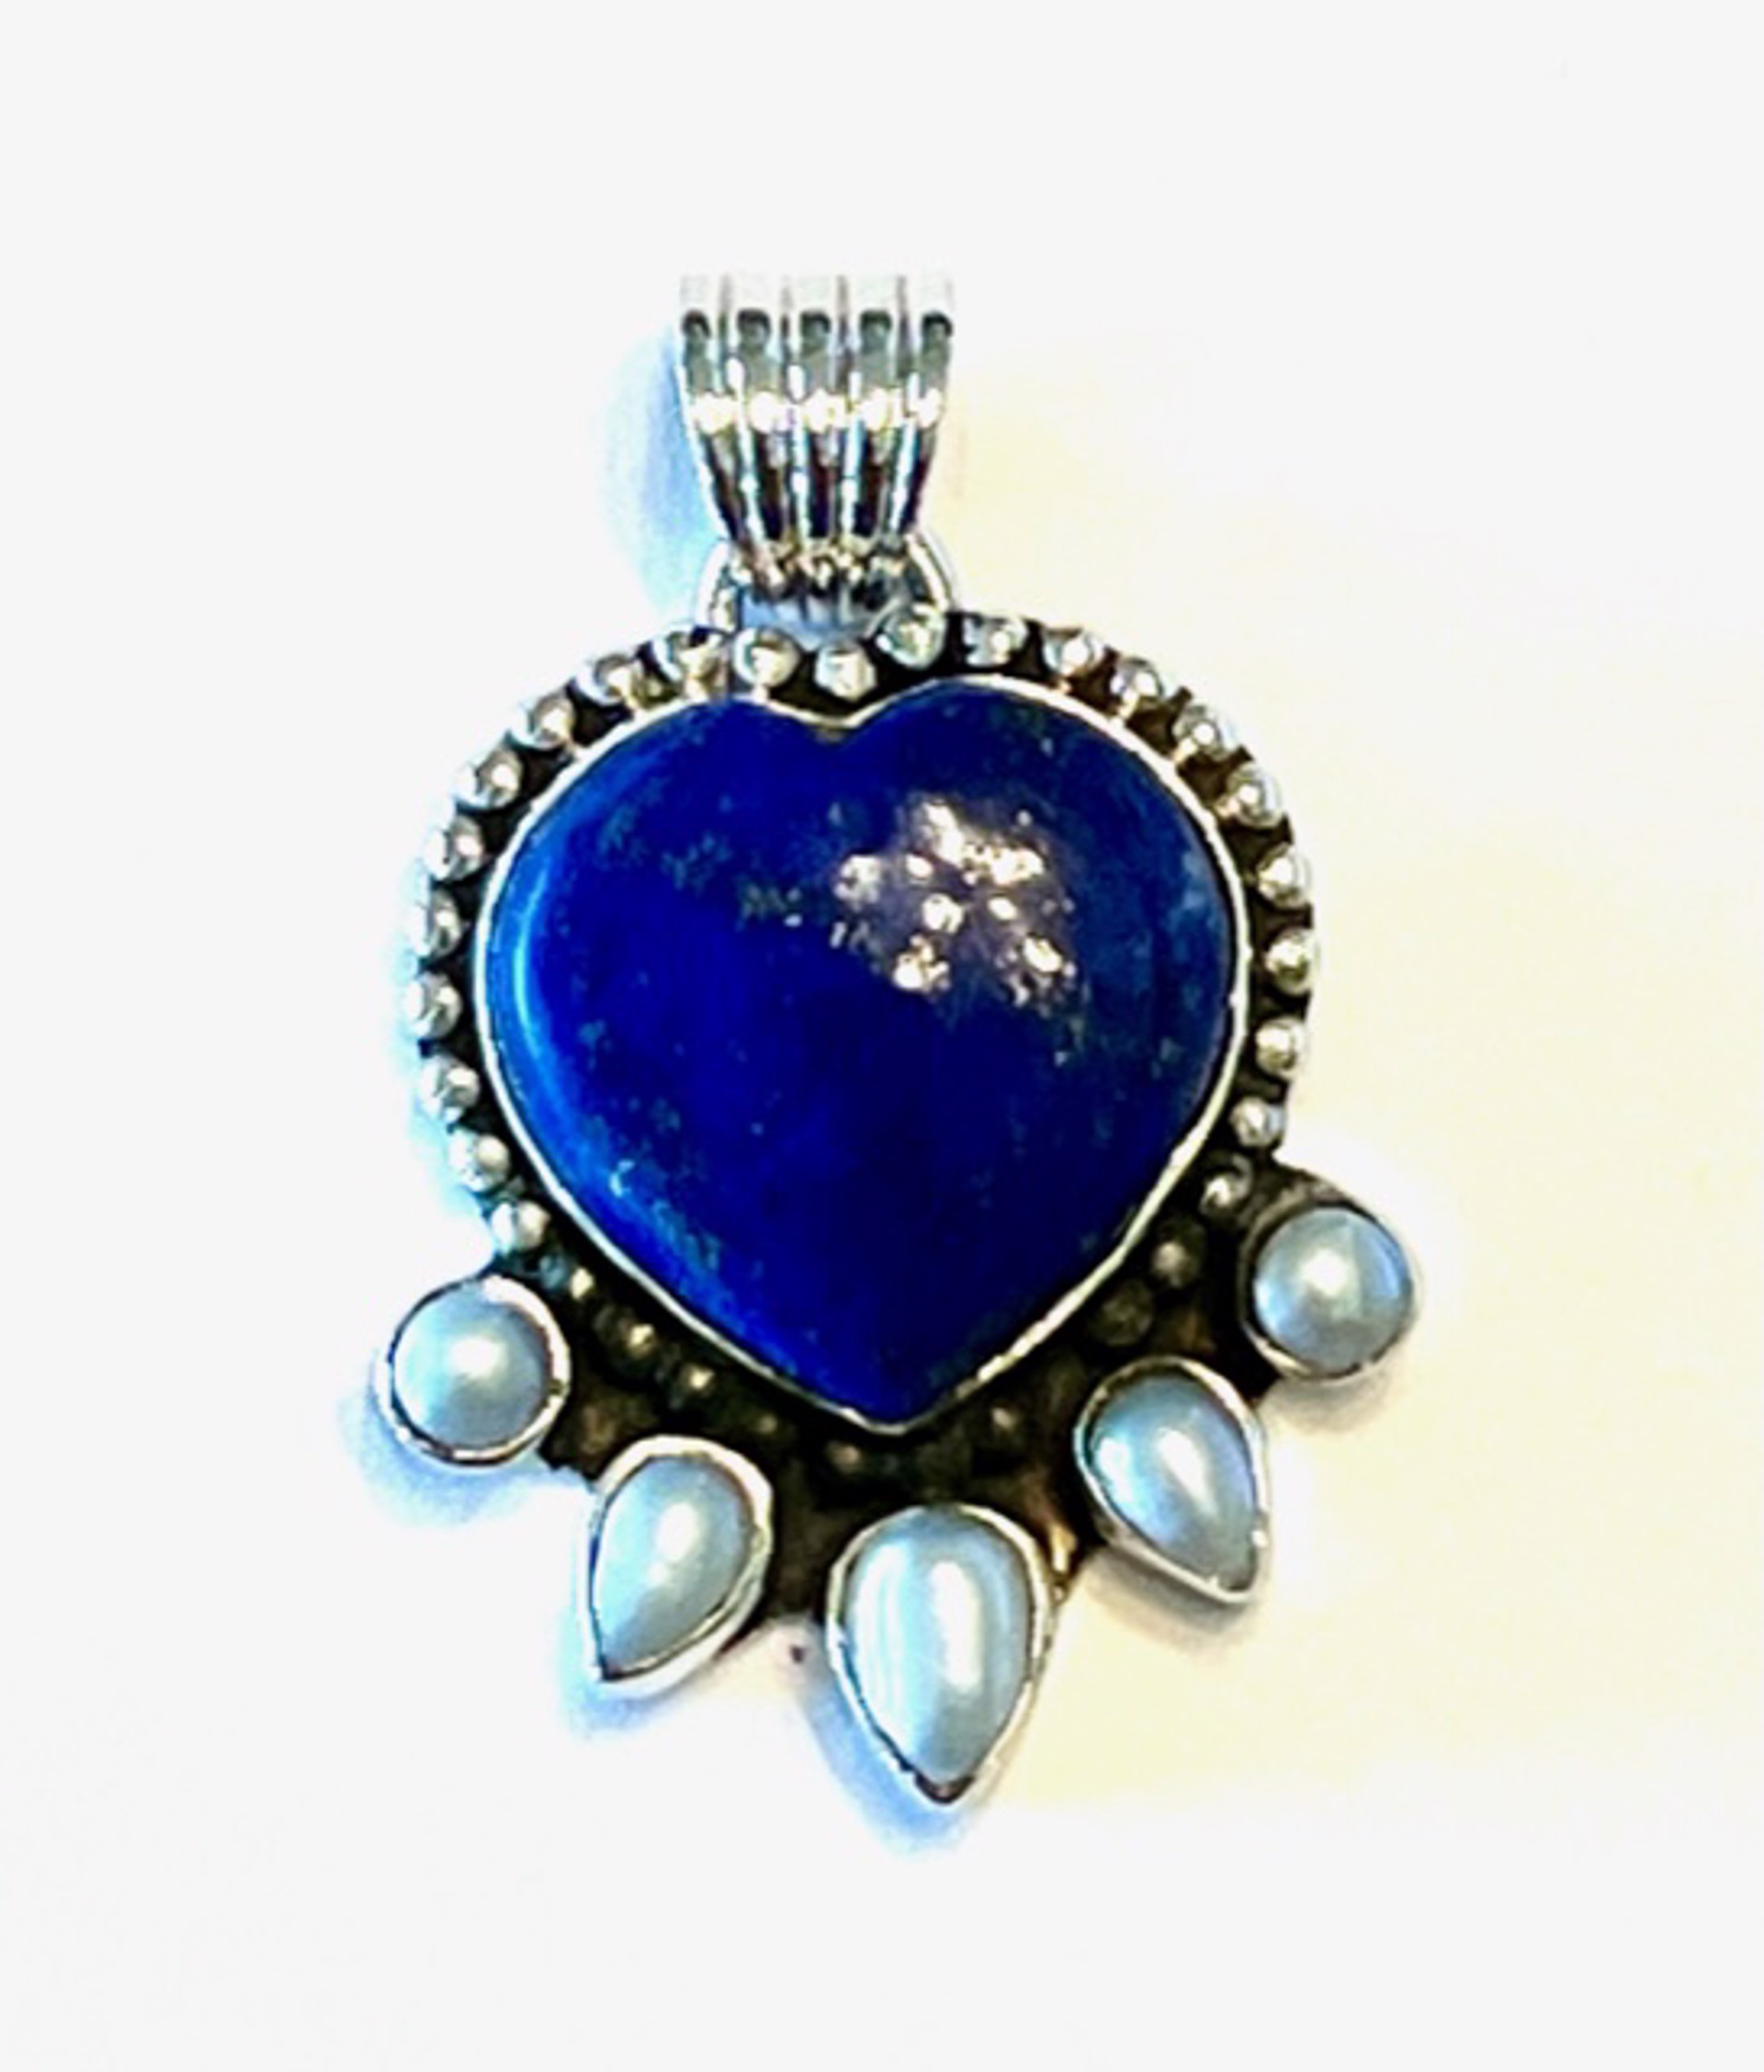 Pendant - Heart, Lapis with Pearl Drops by Dan Dodson